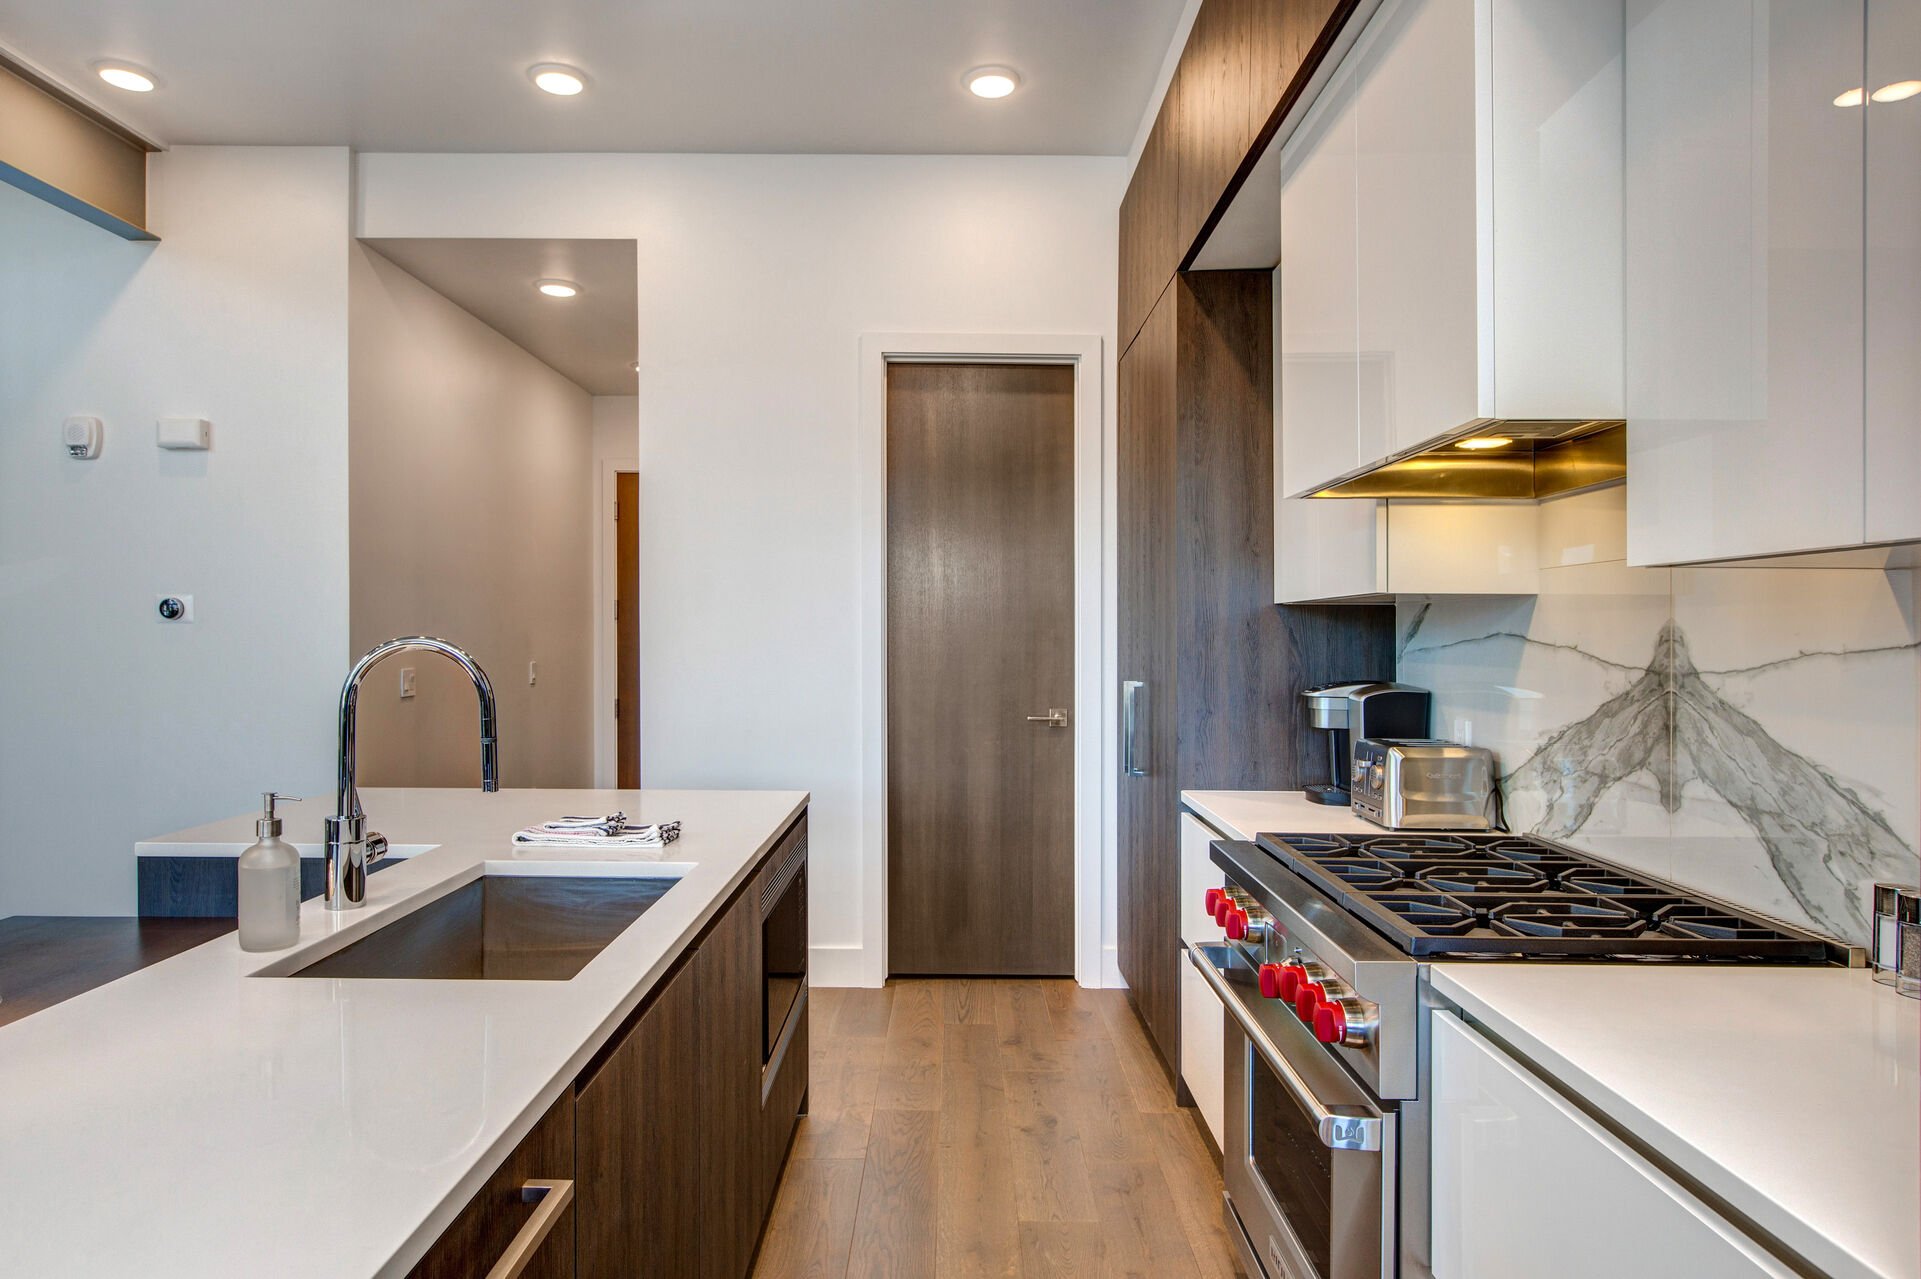 Gourmet Kitchen with High-end Stainless Steel Appliances, Including a 6-Burner Wolf Gas Range